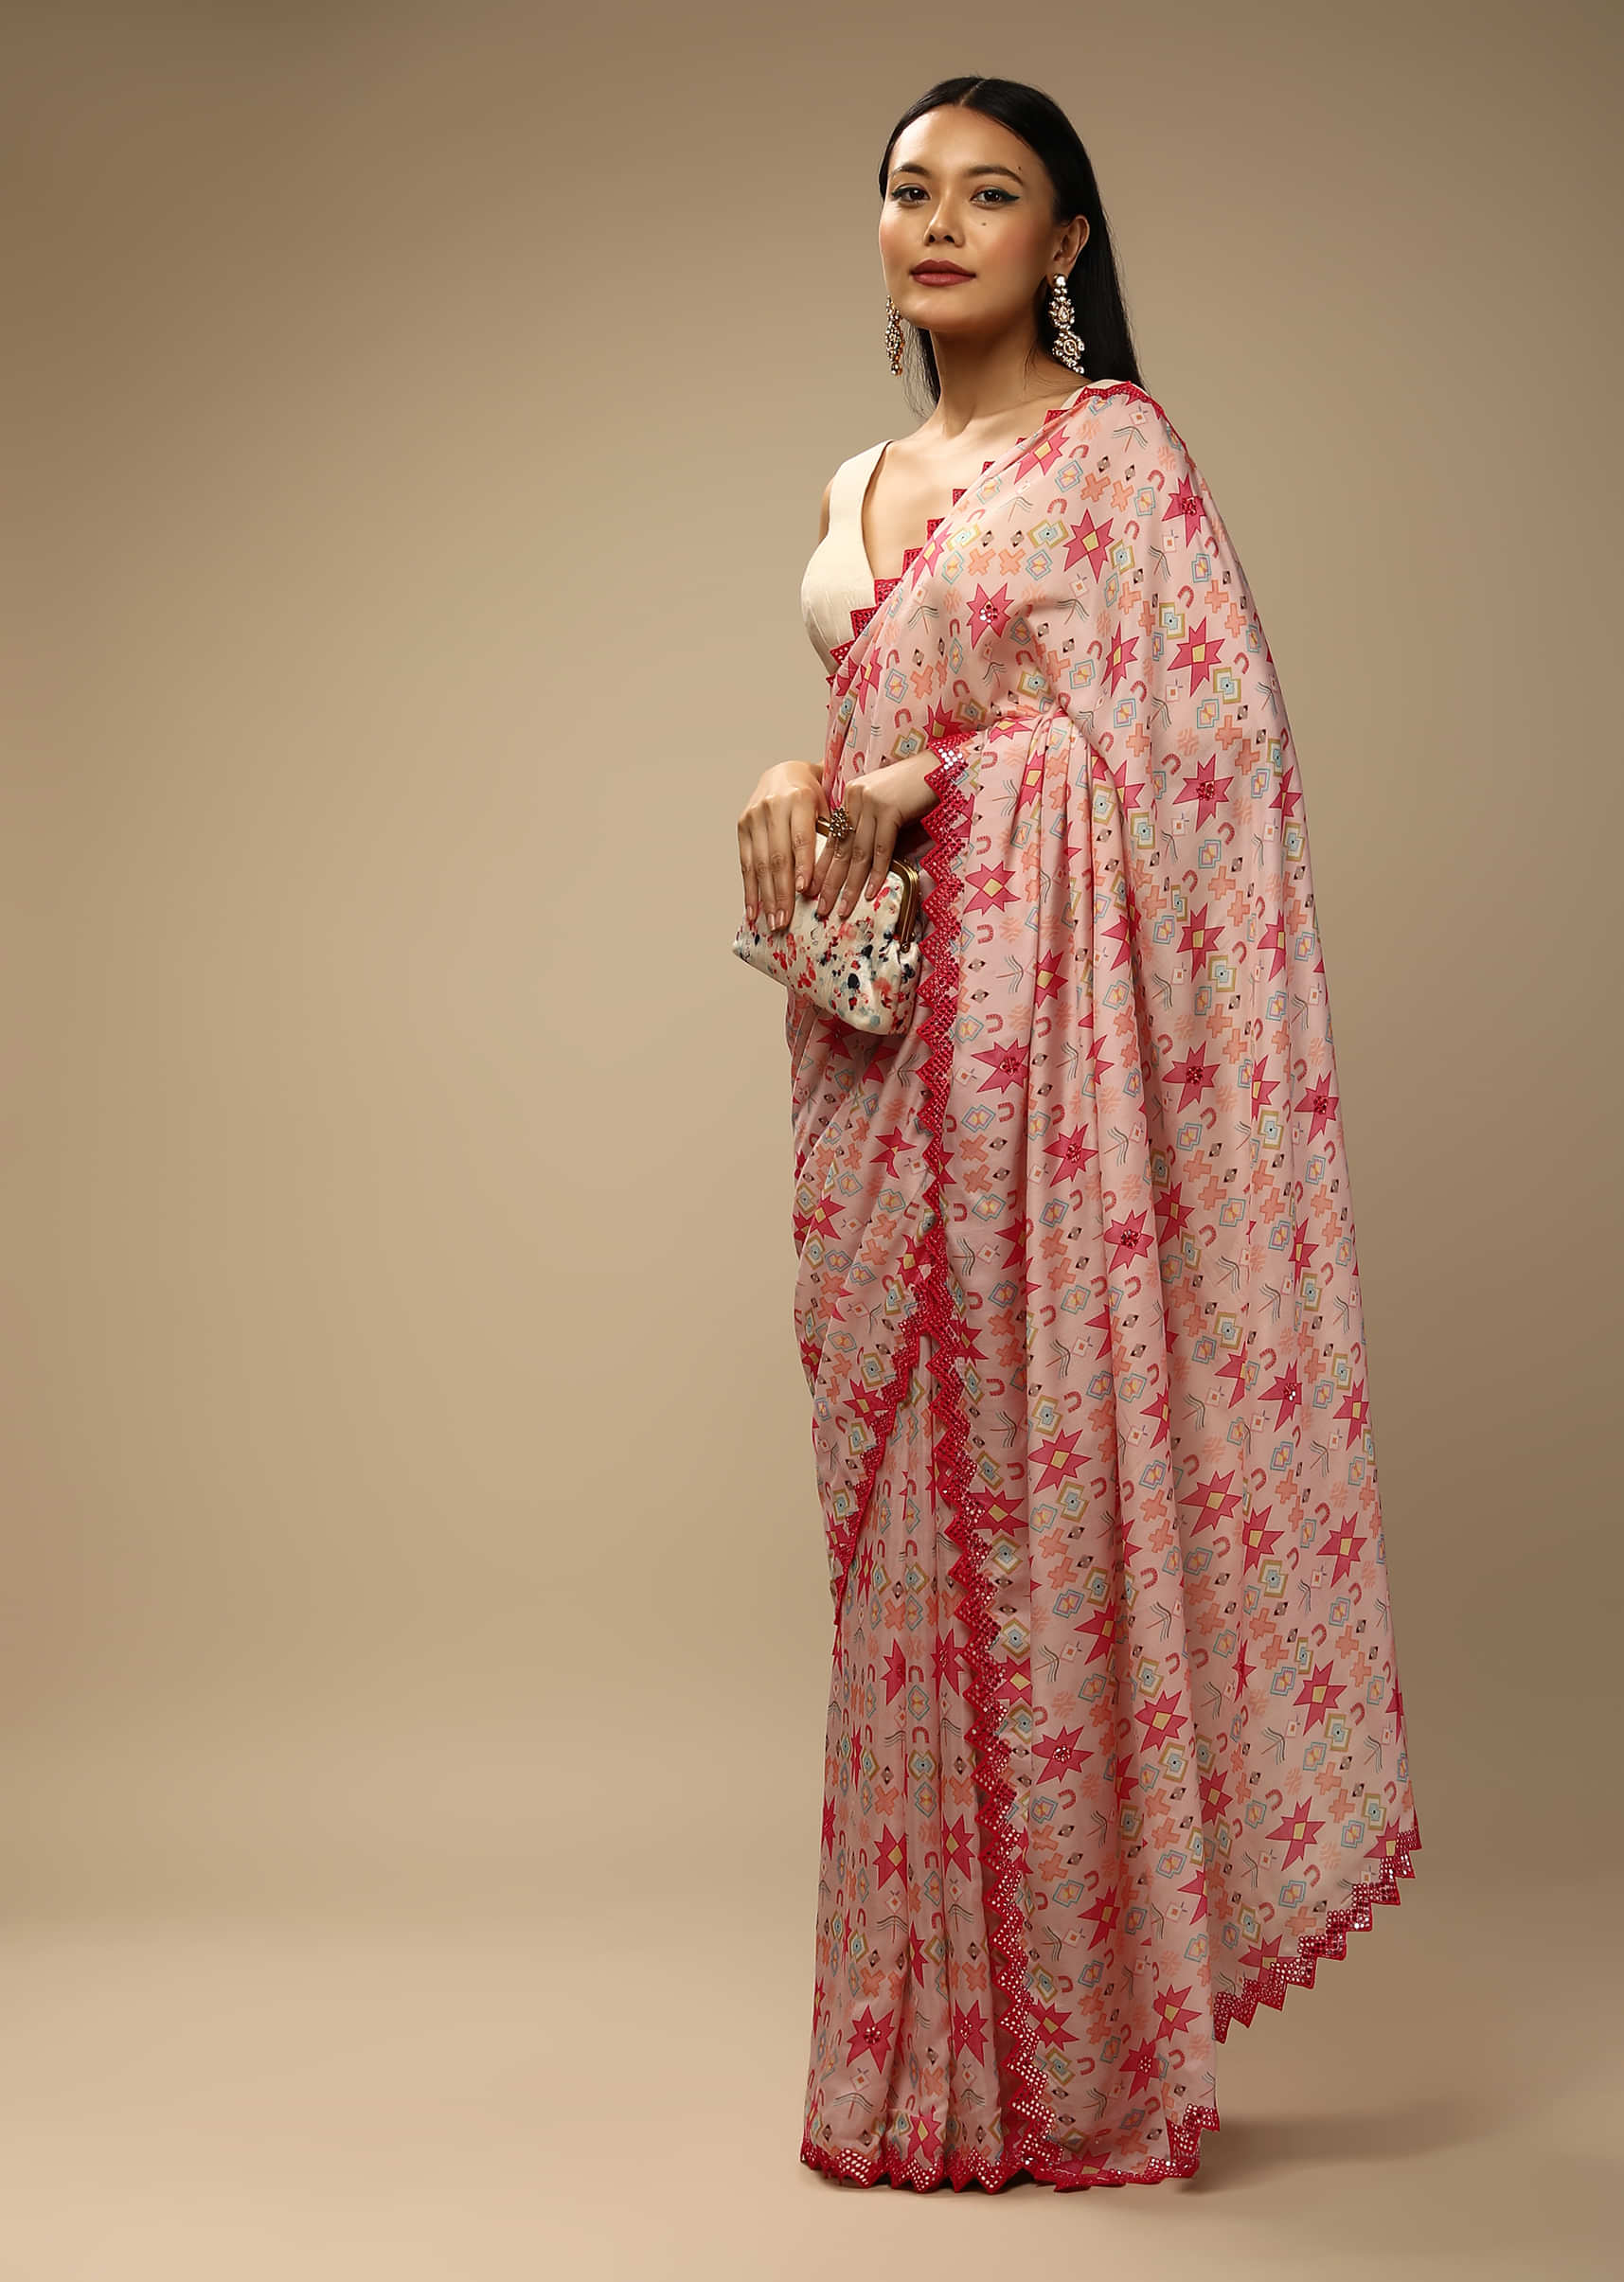 English Rose Pink Saree In Cotton Silk With Self Stripes And Multi Colored Print In Geometric And Abstract Motif